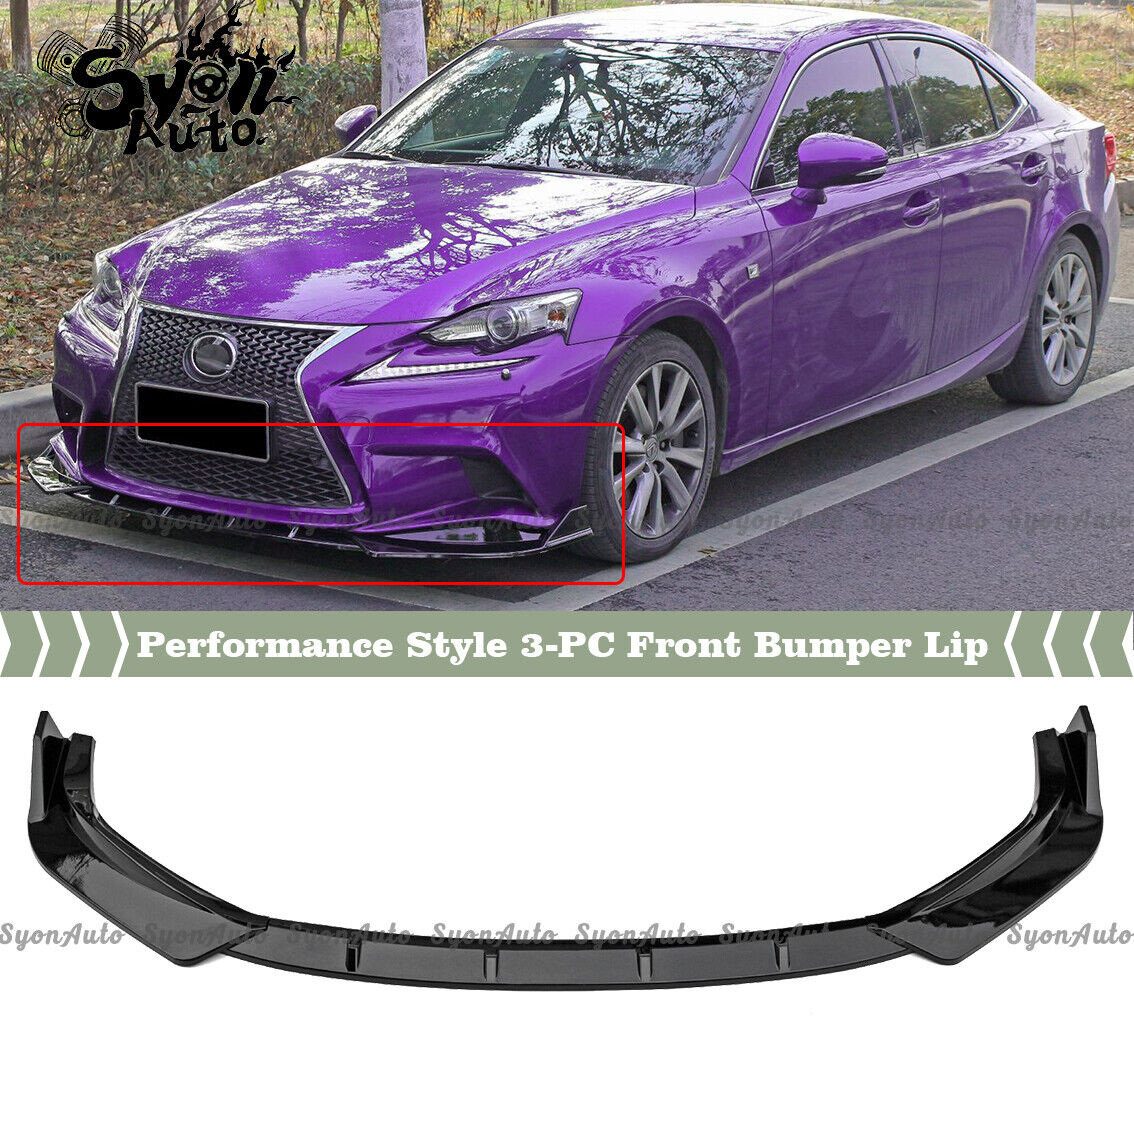 FITS 14-2016 LEXUS IS250 IS350 GLOSSY BLACK PERFORMANCE STYLE FRONT LIP SPLITTER